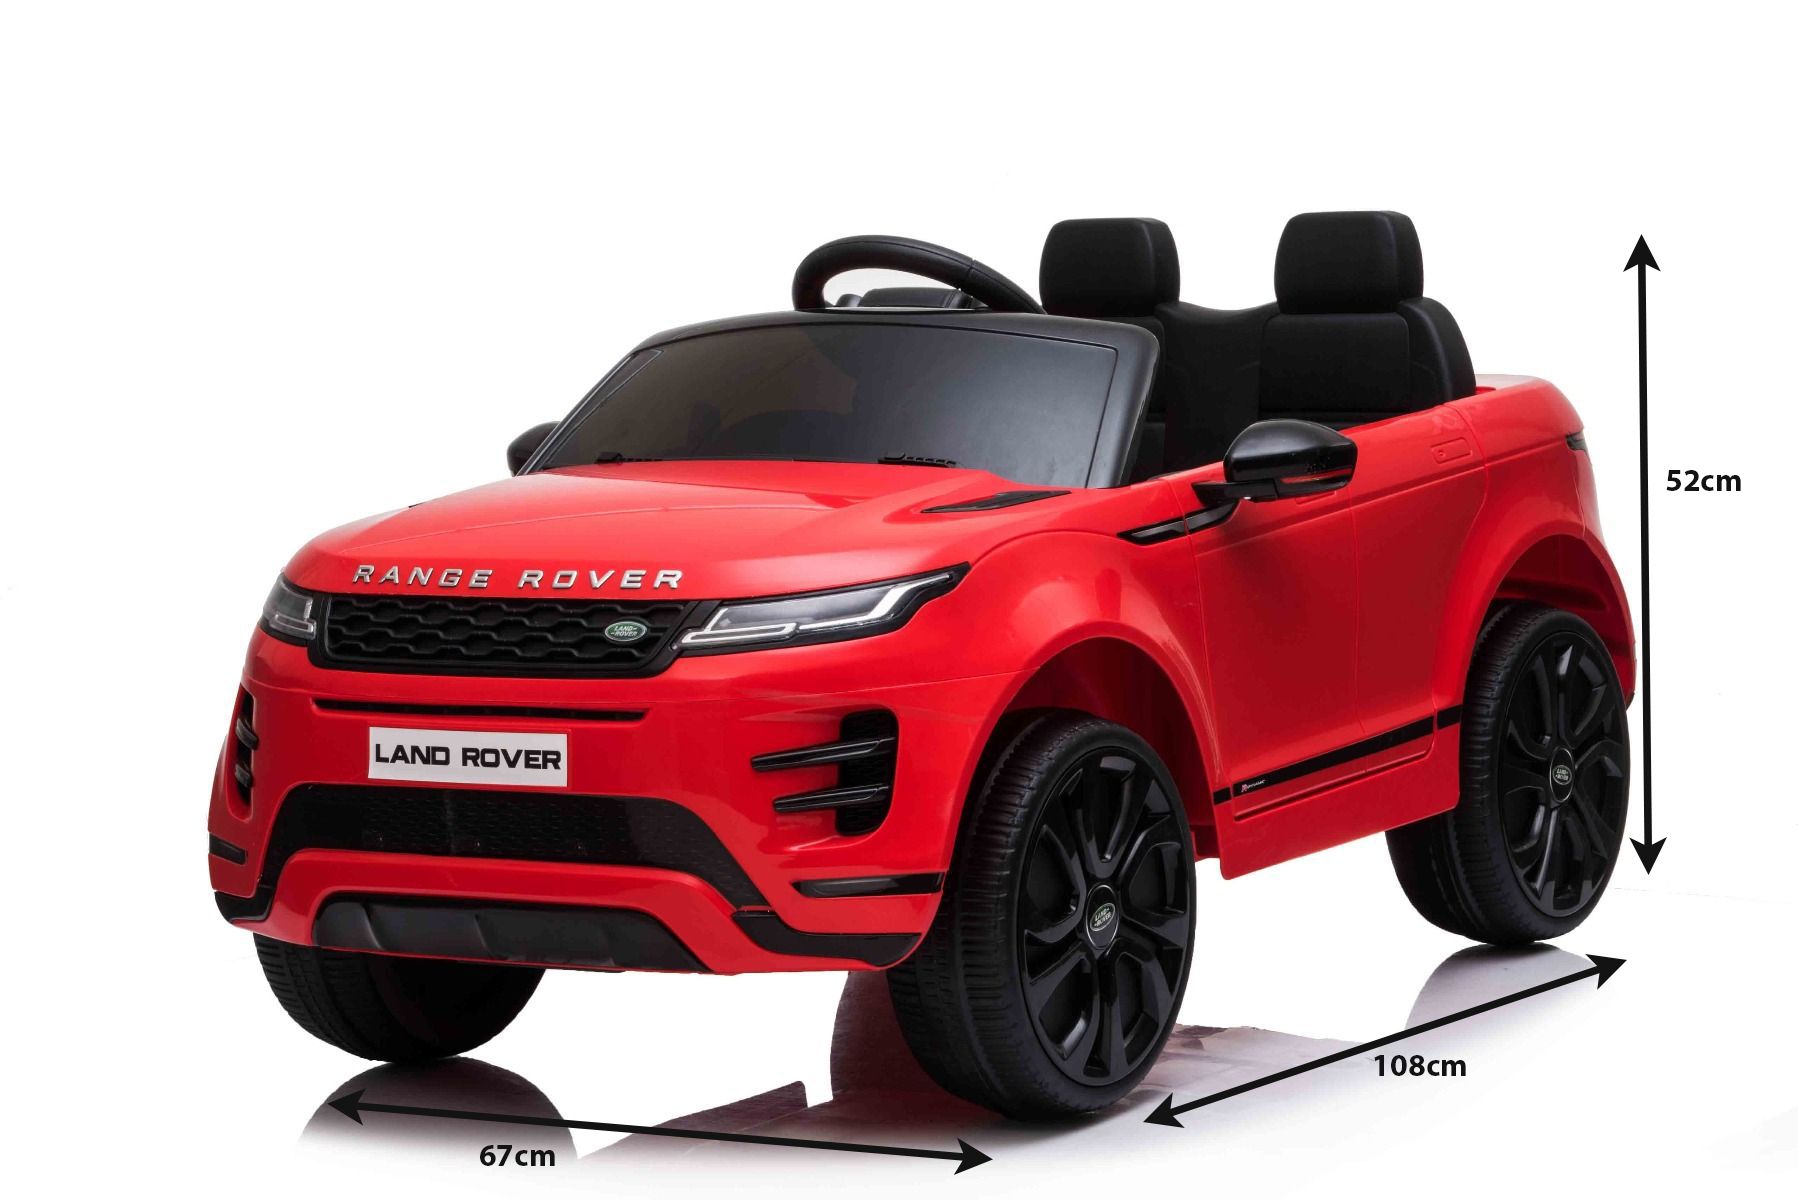 Gaan wandelen dun Stemmen Electric Ride-On Range Rover EVOQUE, Red, Double Leather Seat, MP3 Player  with USB Input, 4x4 Drive, 12V10Ah Battery, EVA Wheels, Suspension Axles,  Key start, 2.4 GHz Bluetooth Remote Control, Licensed